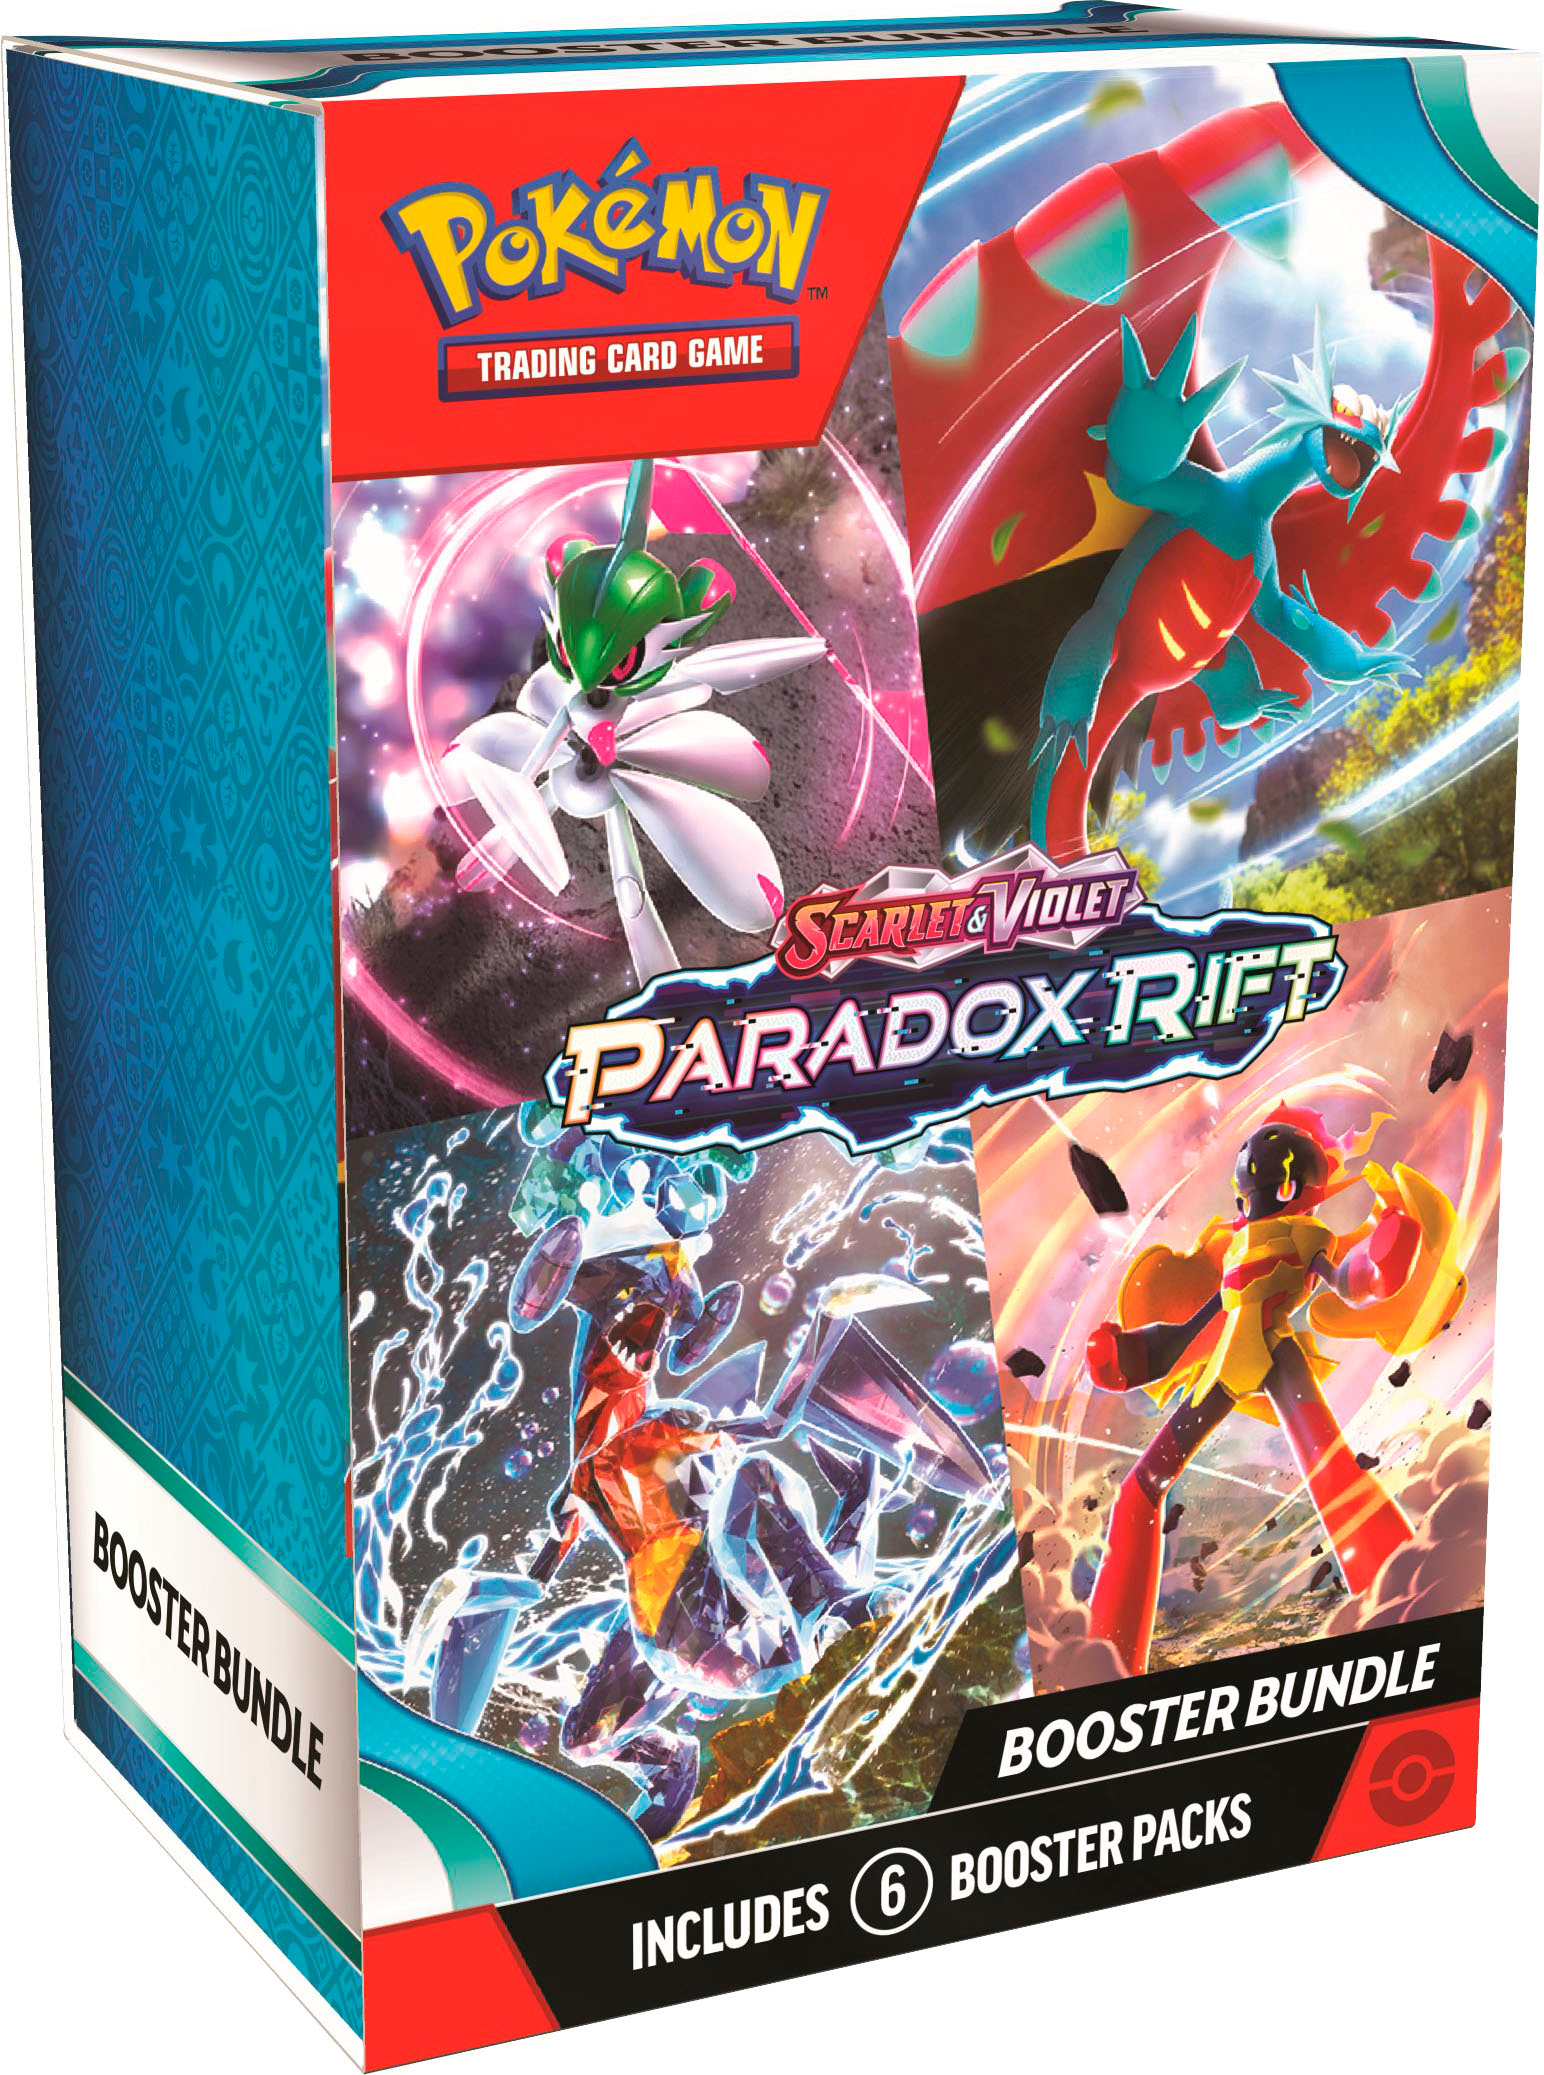 Pokémon Scarlet and Violet Paradox Pokémon, including Iron Valiant and  Roaring Moon locations explained